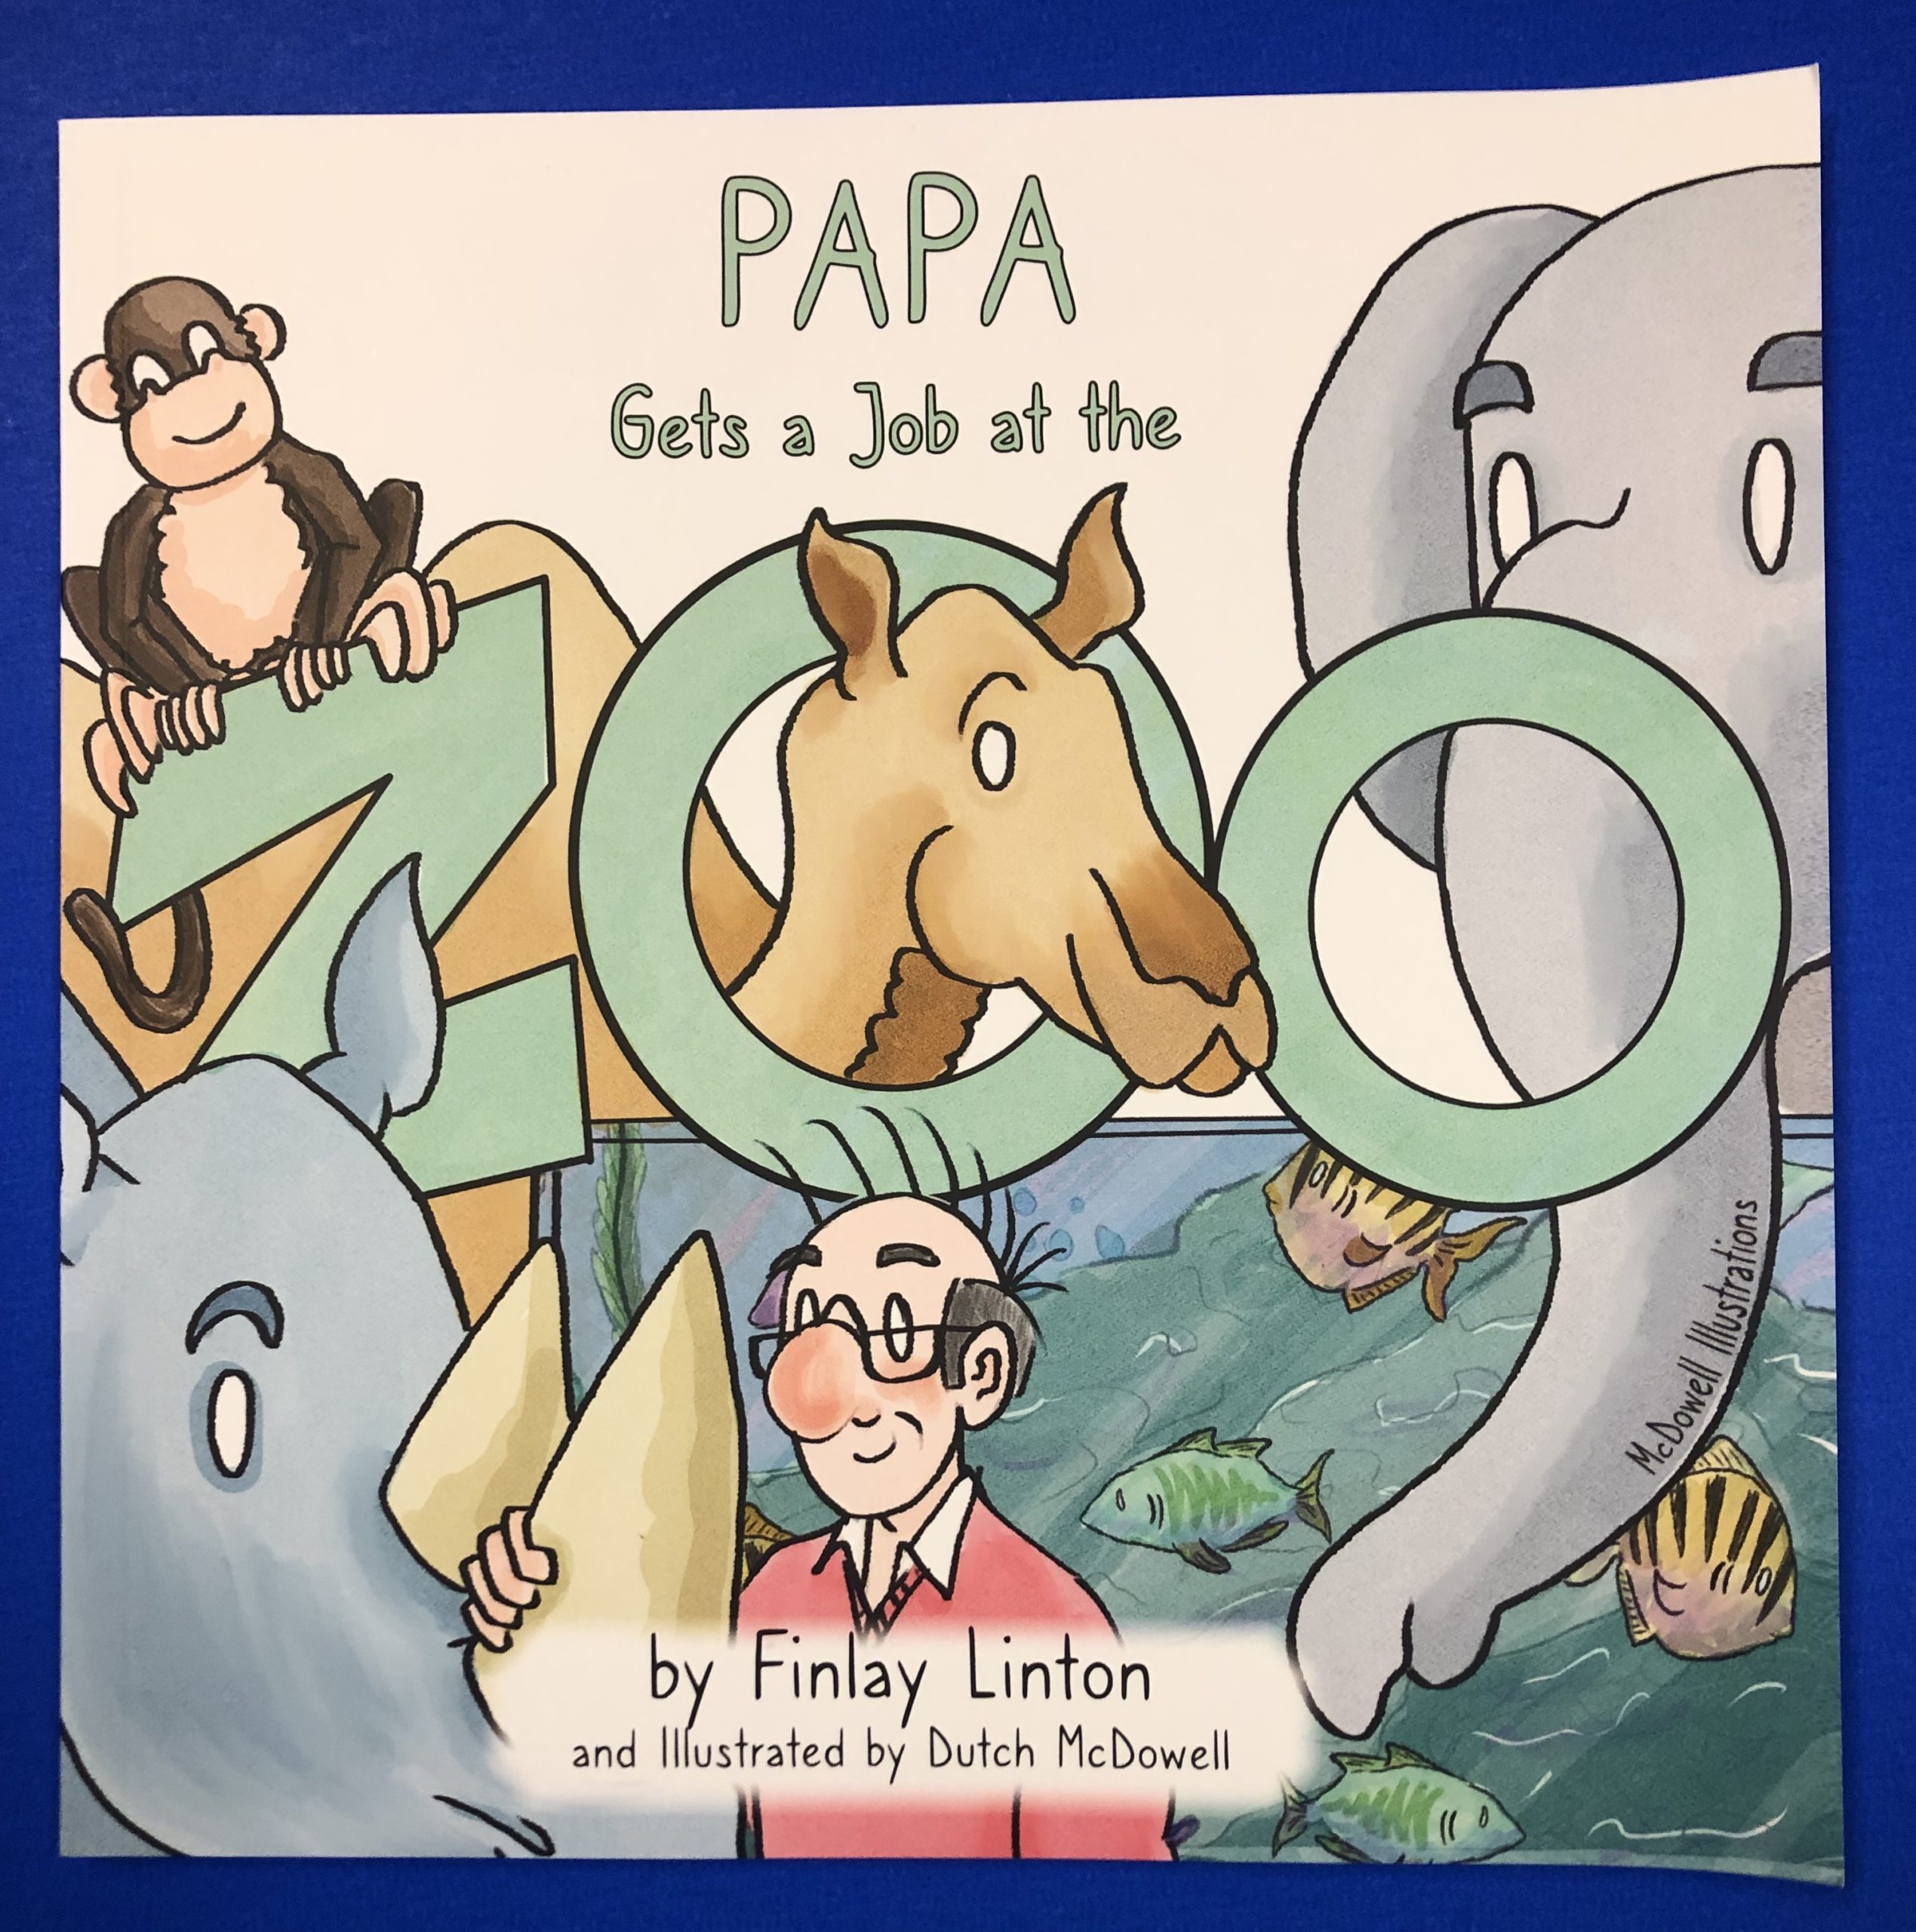 Papa Gets a Job at the Zoo - Foyle Hospice, Northern Ireland - palliative  care services and support